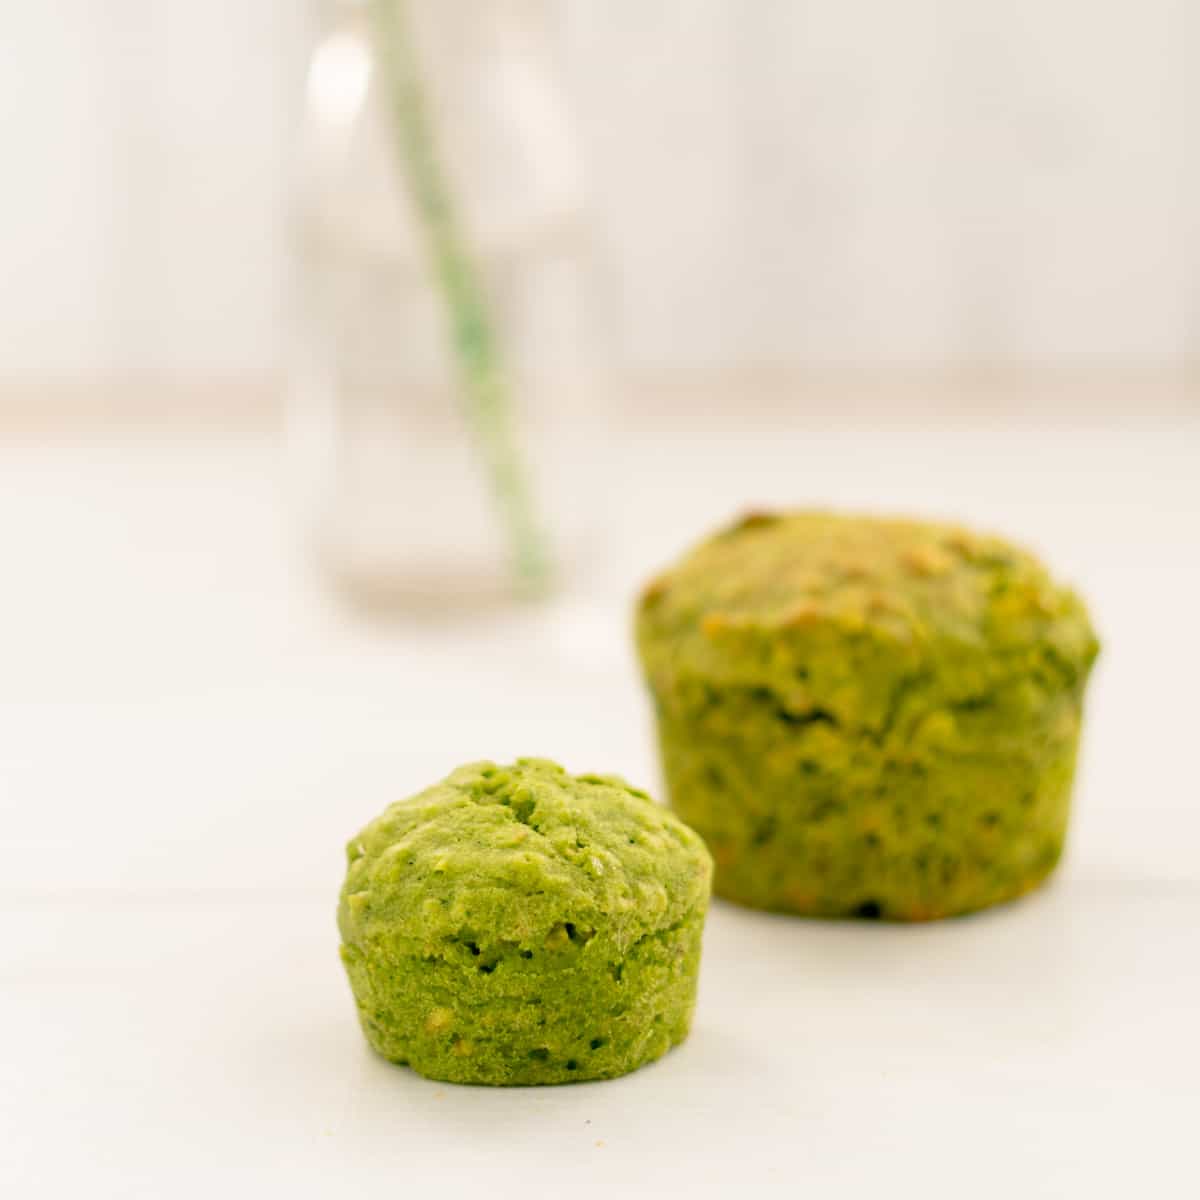 a mini spinach muffin sitting next to a regular sized muffin